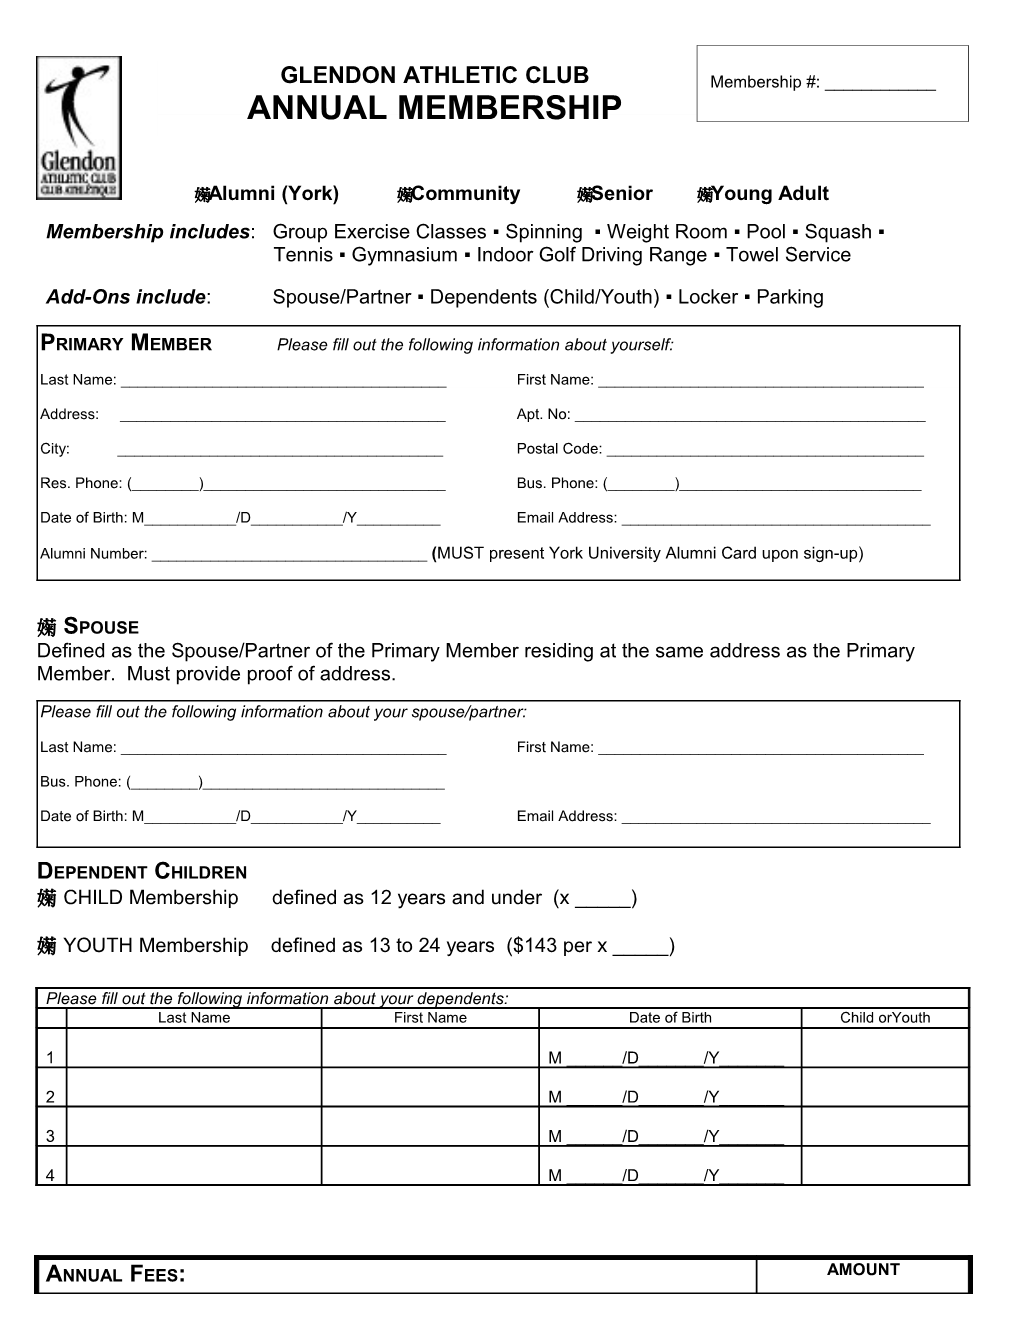 Primary Member Please Fill out the Following Information About Yourself